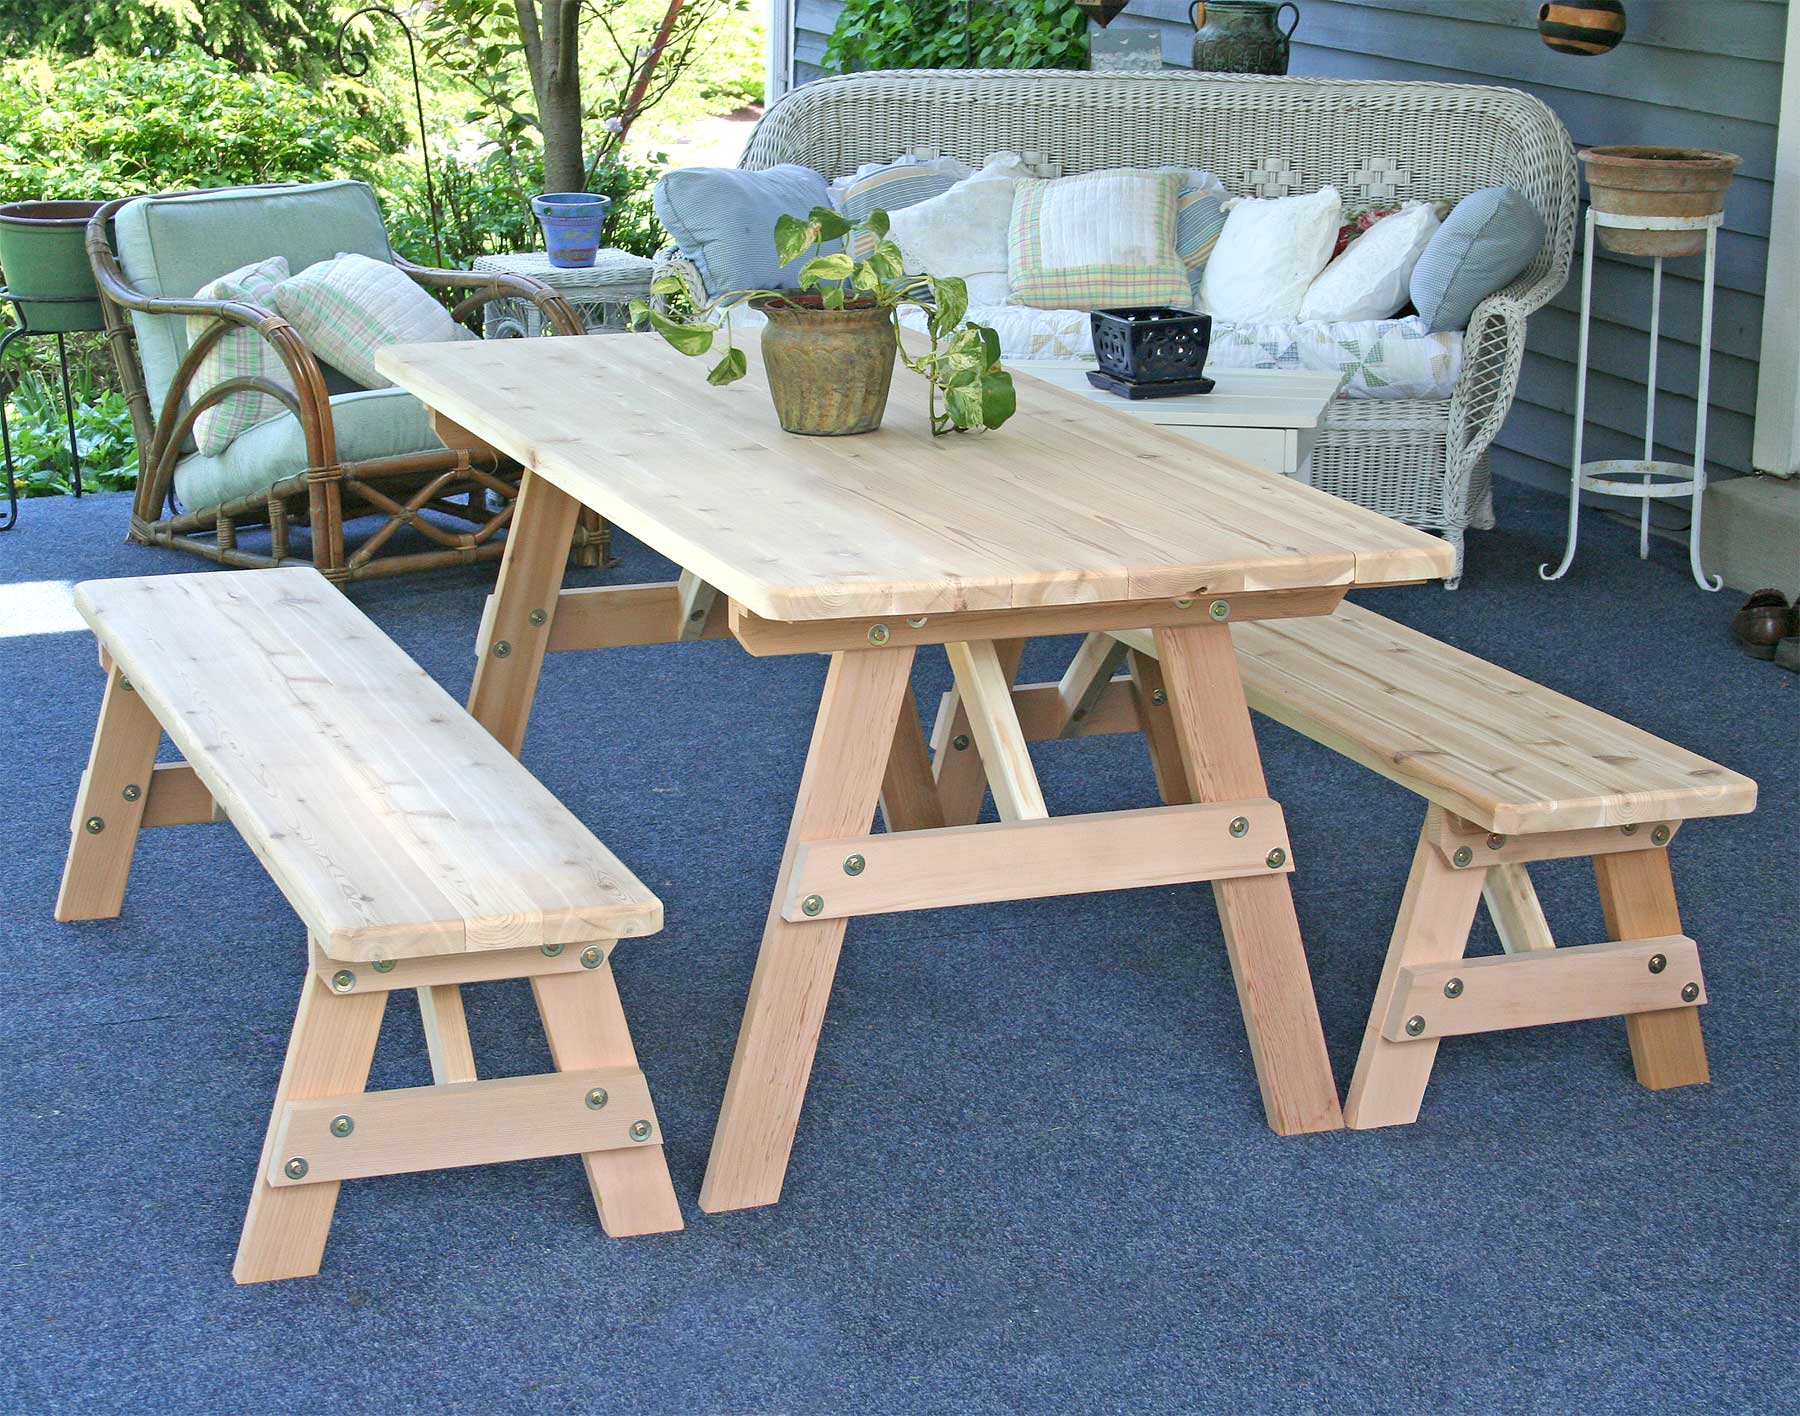 Picnic Table W Unattached Benches Plans Gym Workbench